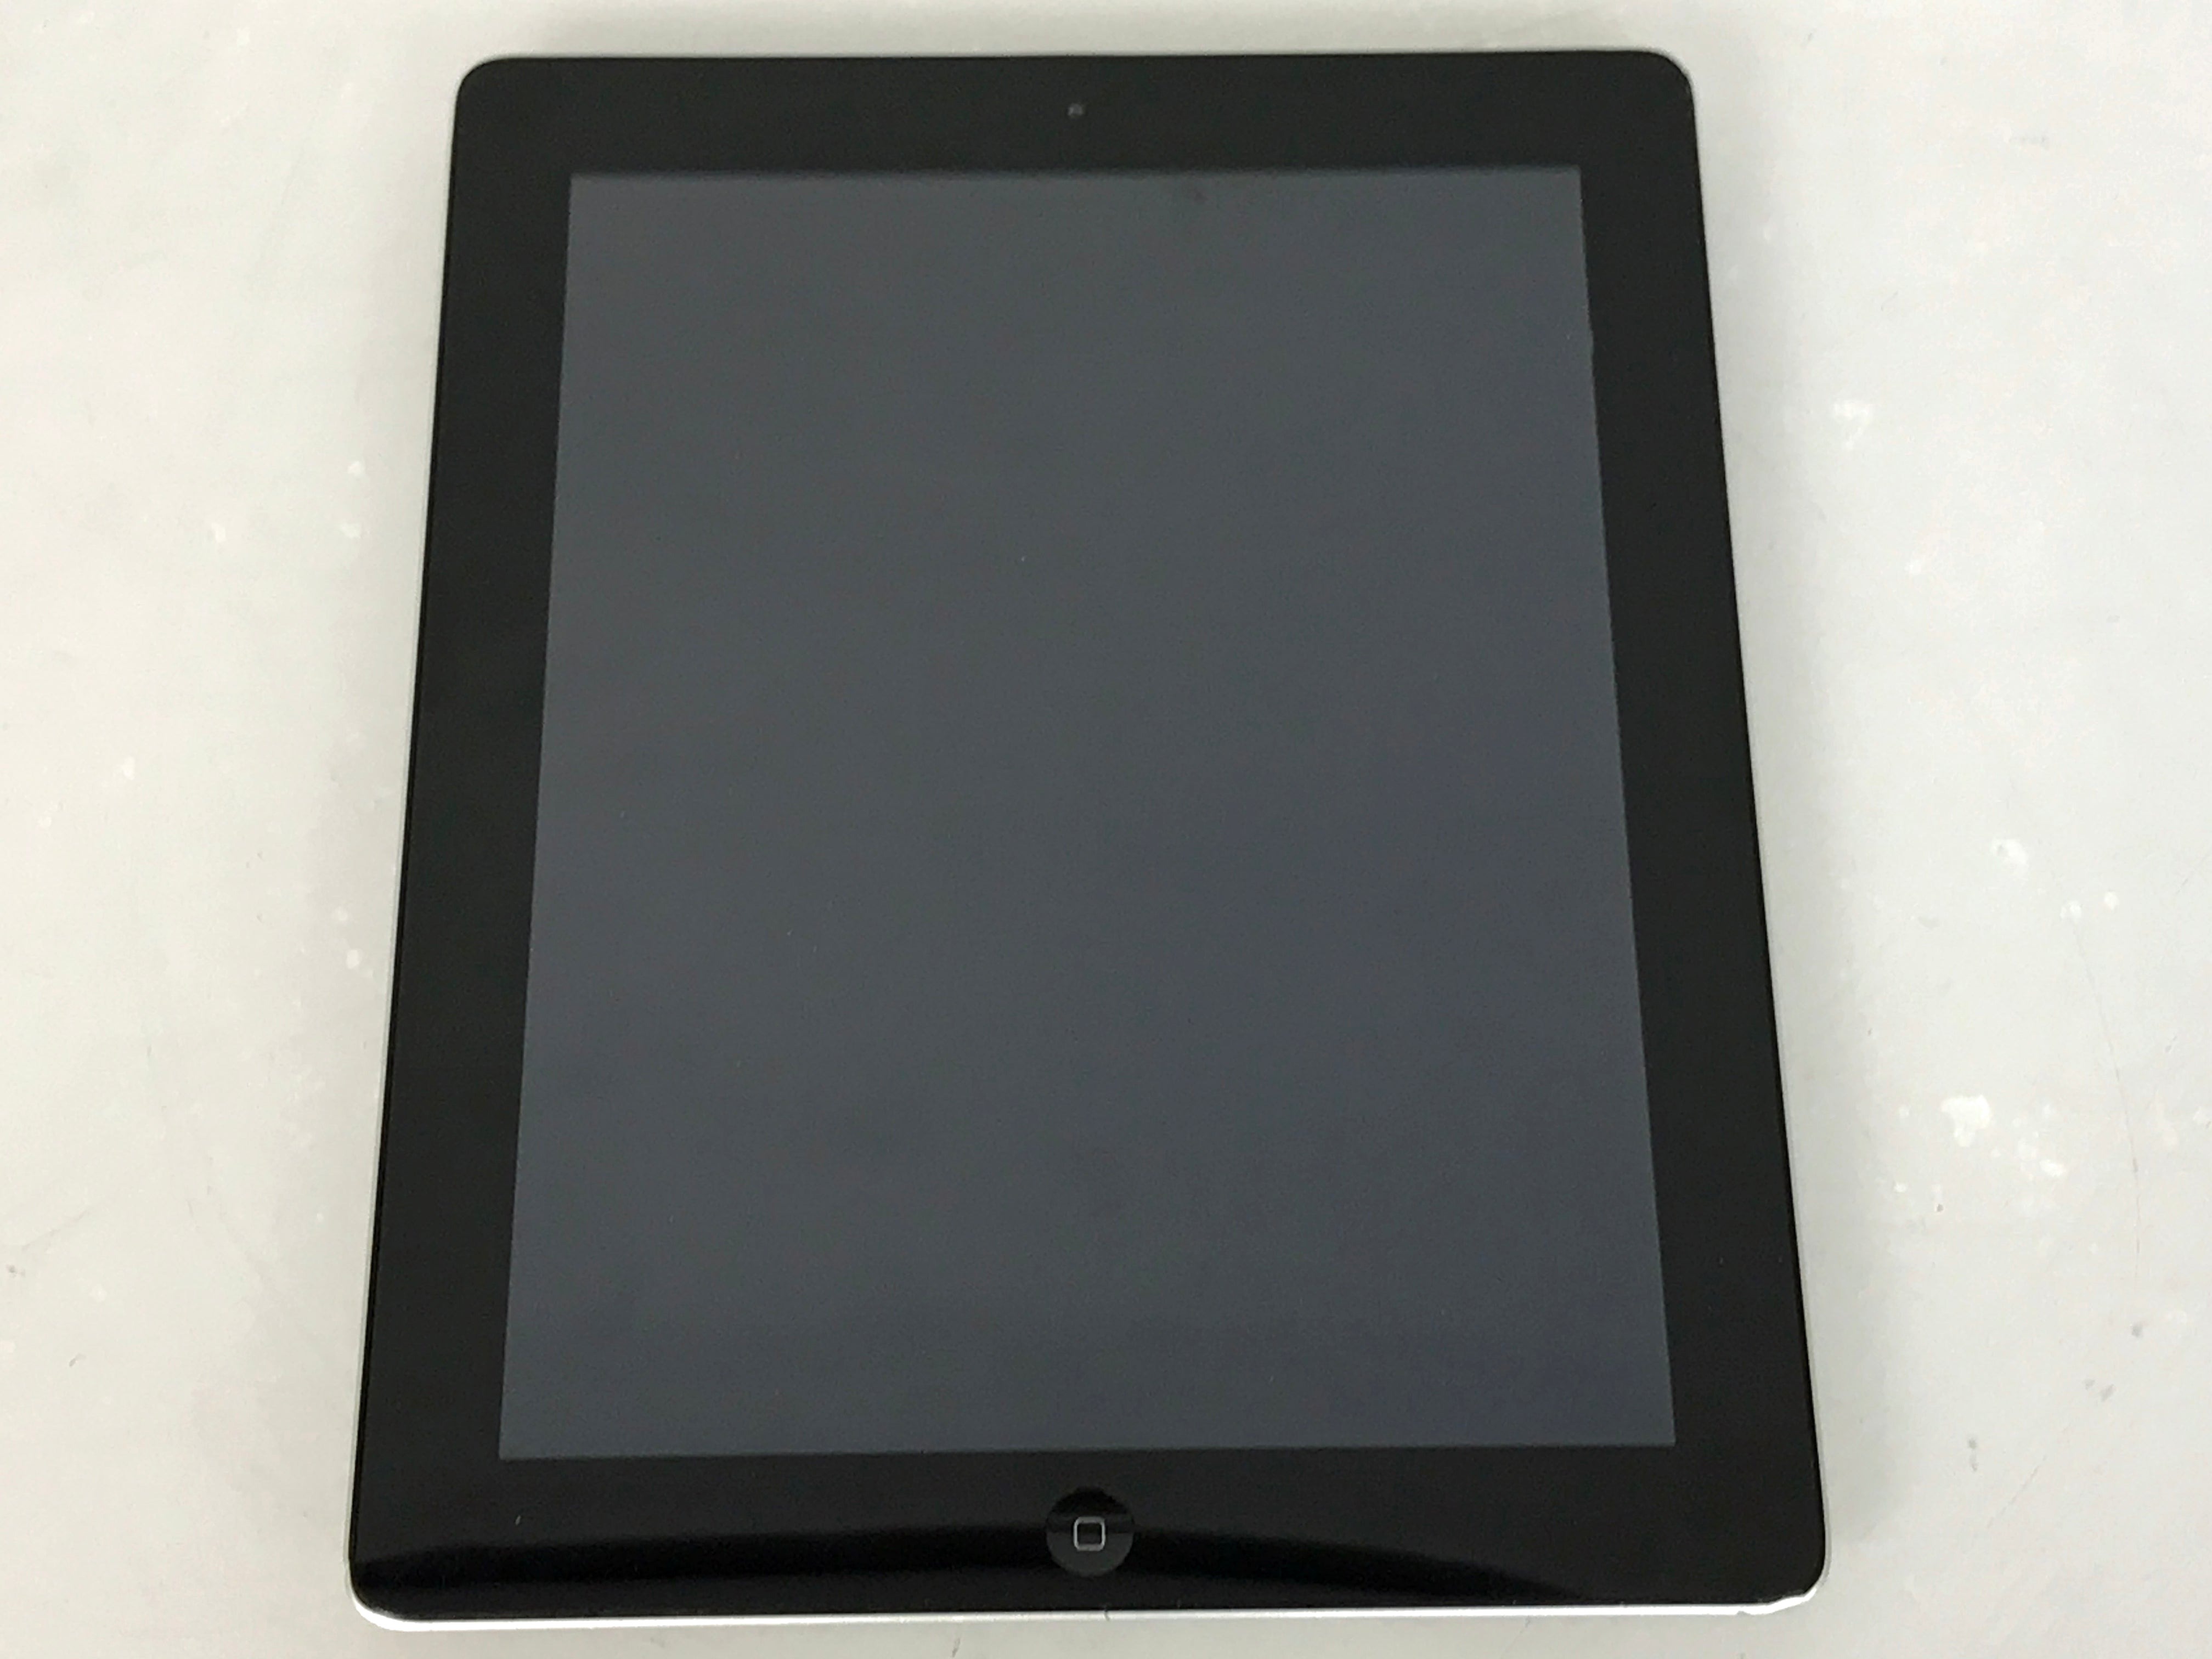 Apple Black iPad (4th Gen) 32GB 9.7" A1458 WiFi Only *Dented Corner, Scratched Display* #1